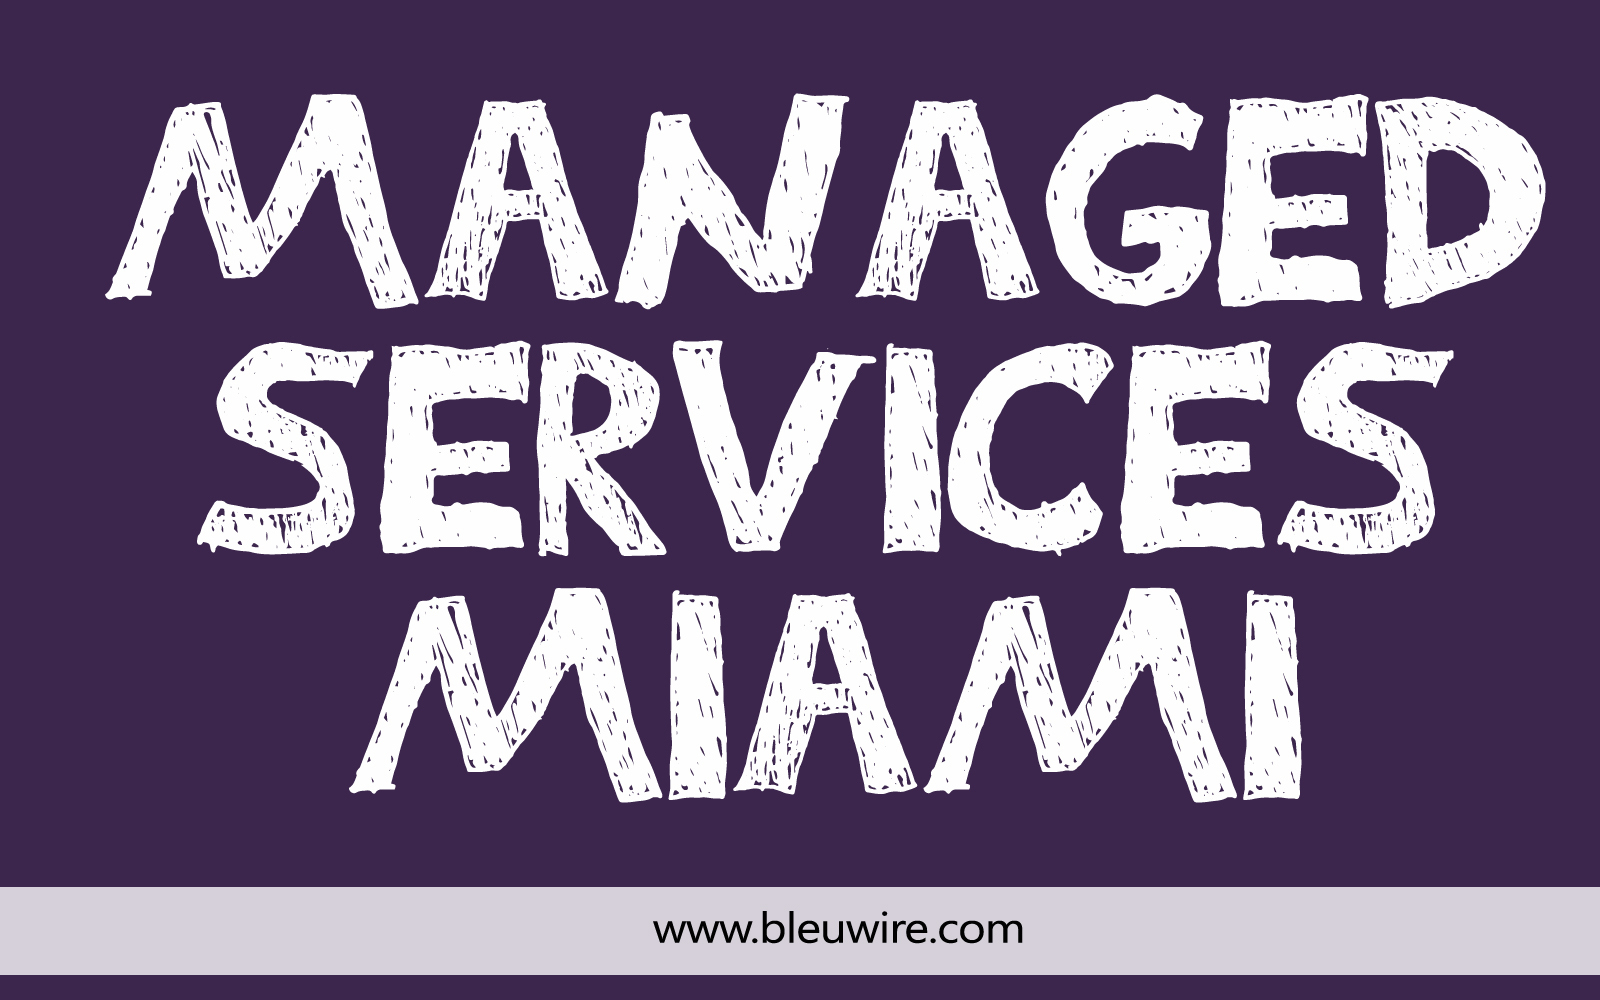 Managed Services Miami